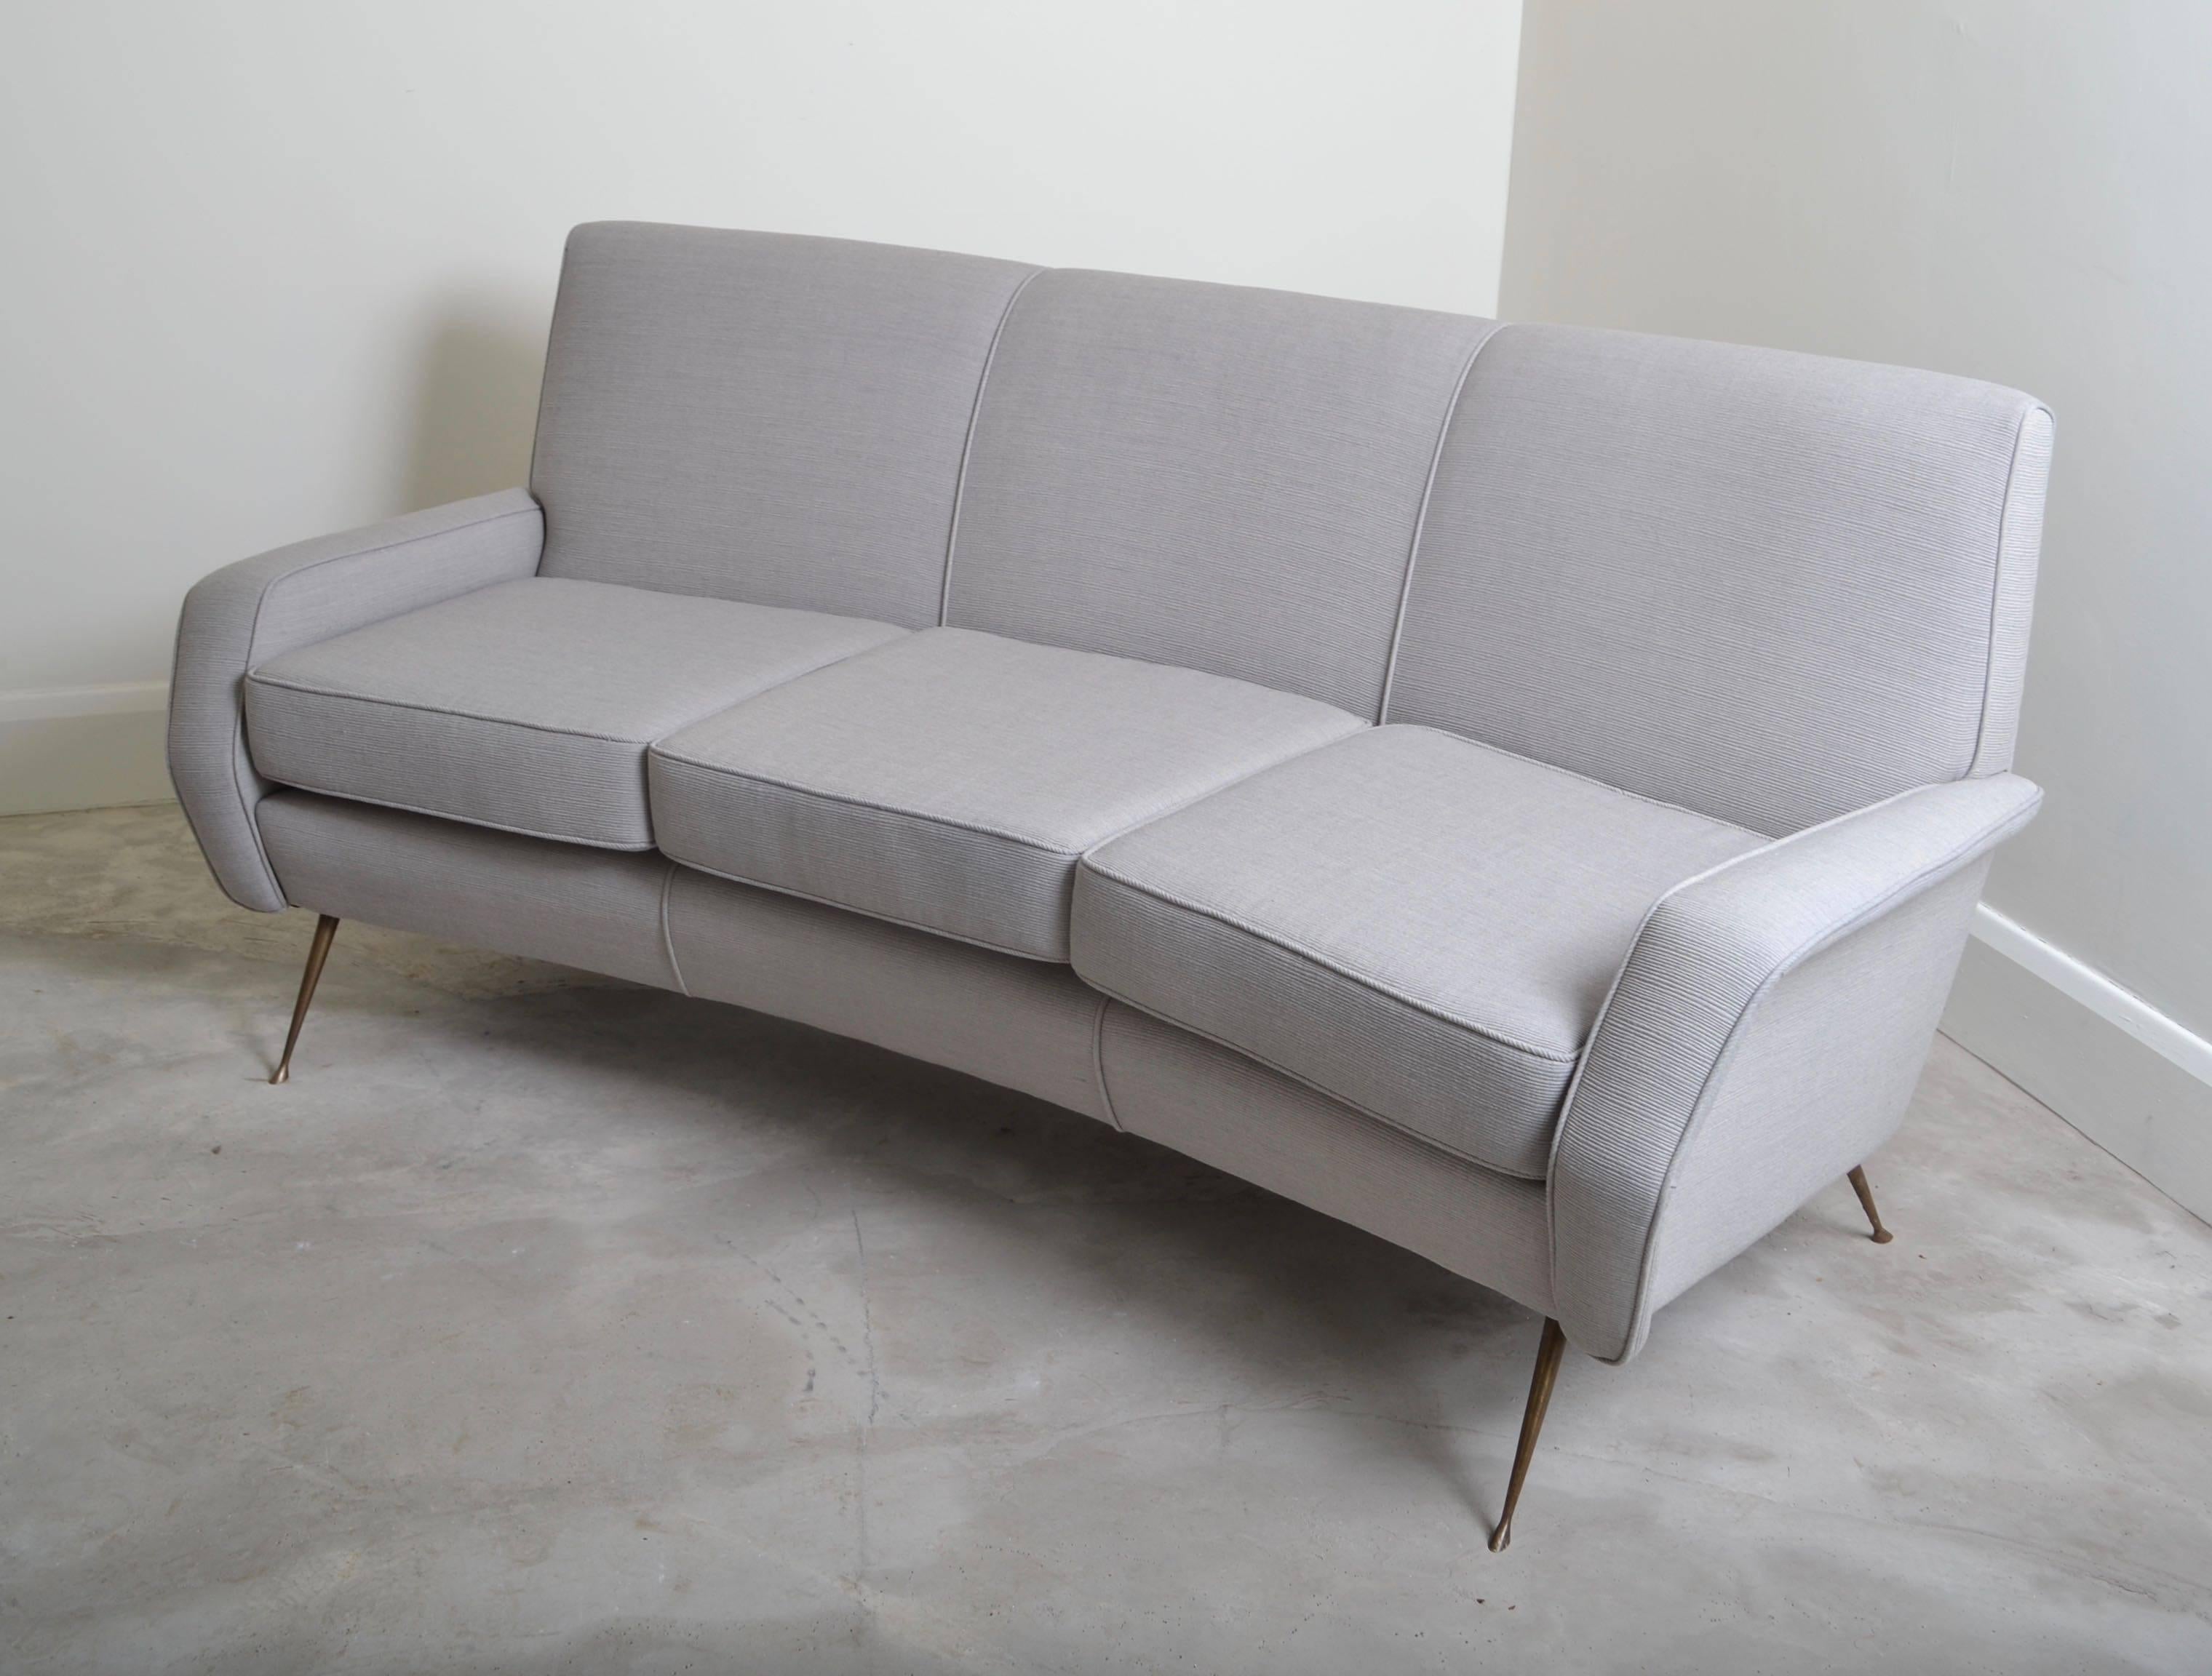 Three seater curved sofa designed by Gigi Radice , Italy 1950.
The sofa has been completely renovated and re-upholstered in a
Kvadrat grey fabric with a slight ribbed texture.
The legs are lacquered brass and add a nice sculptural element 
